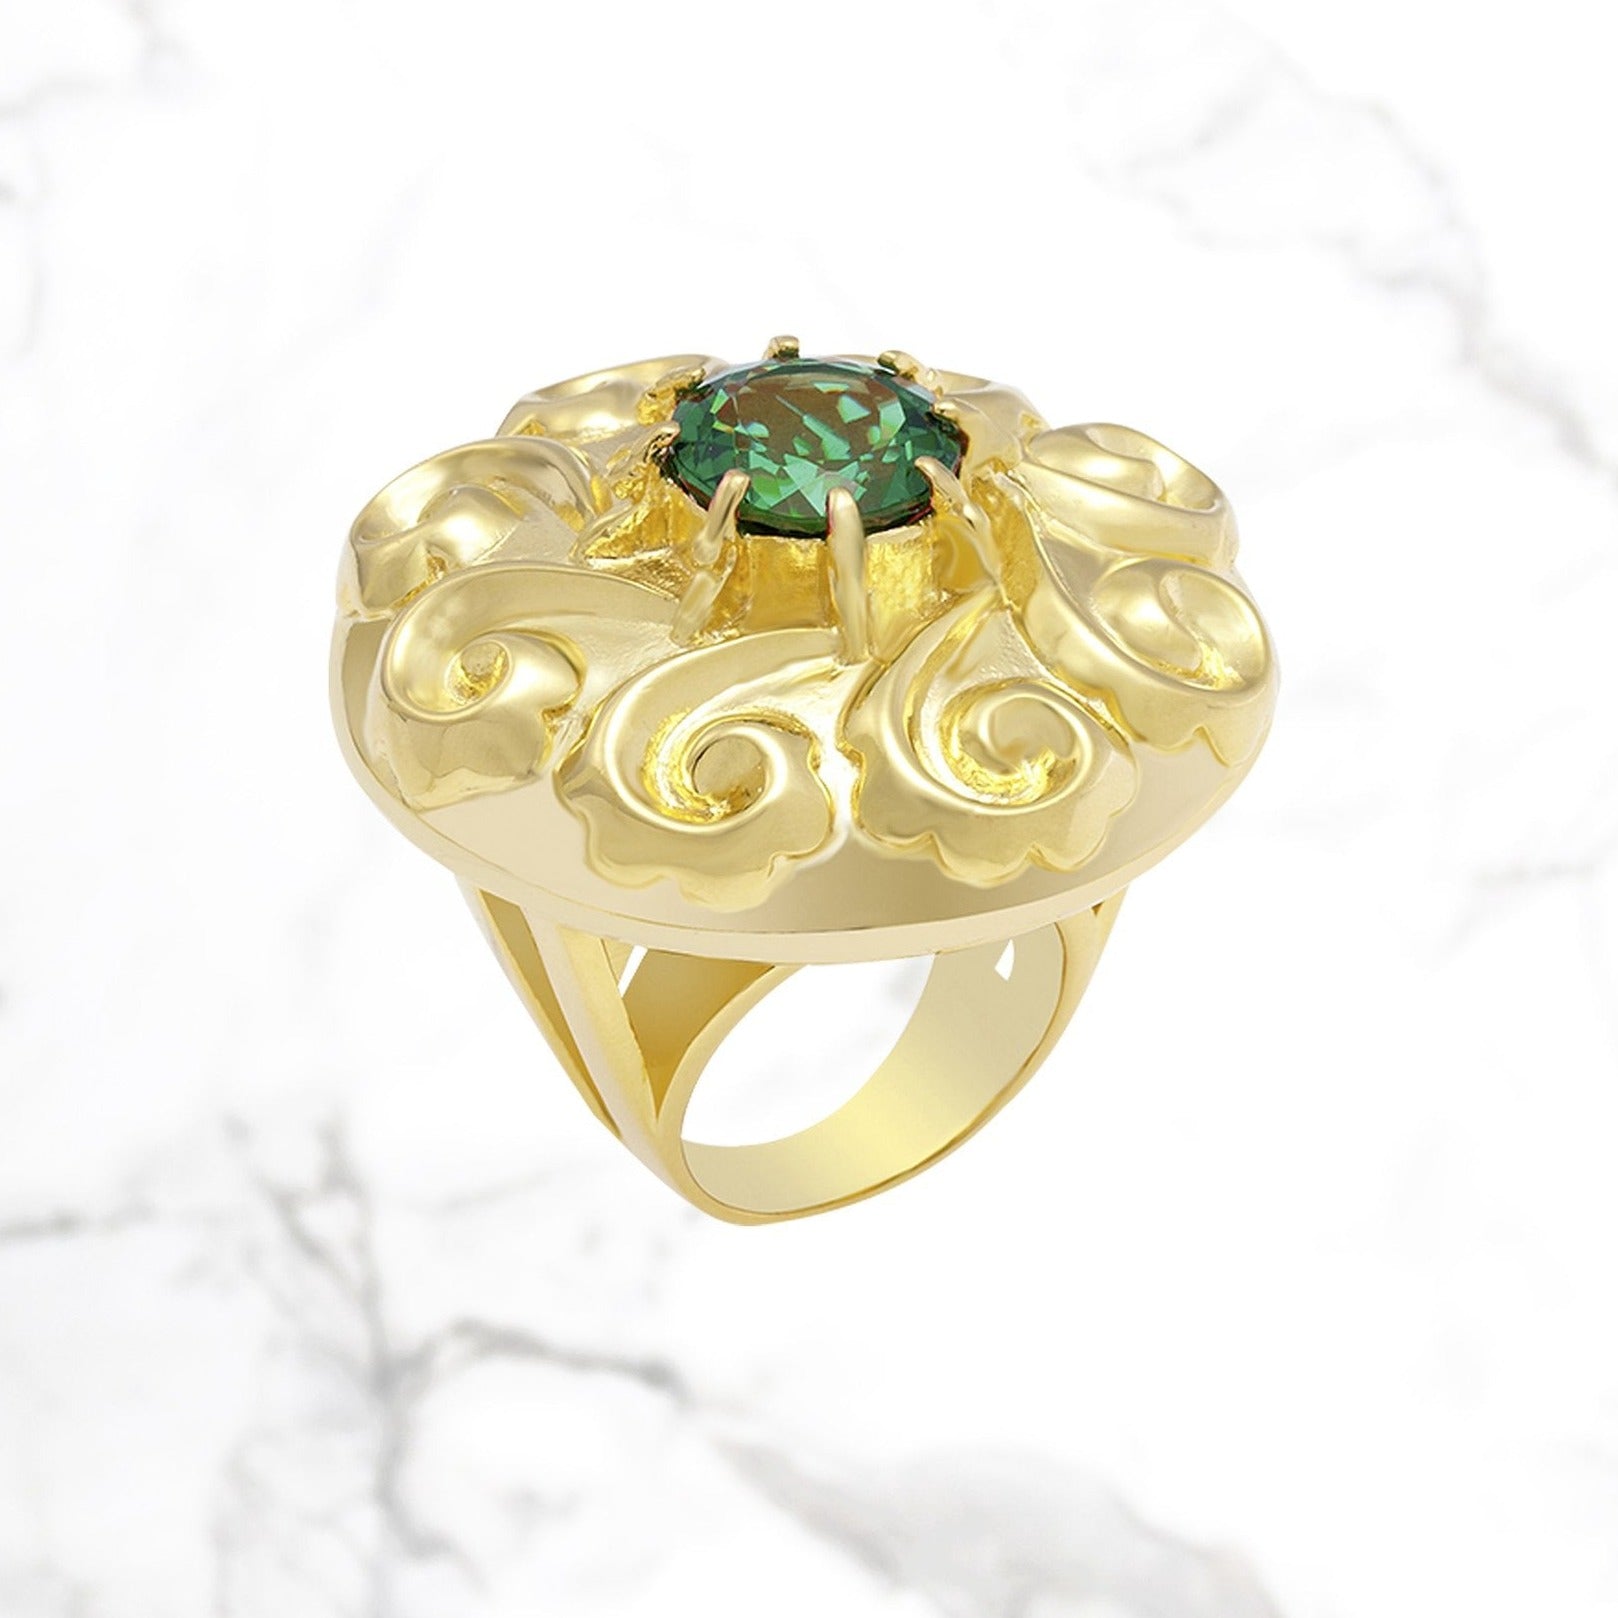 M2 gold cocktail ring